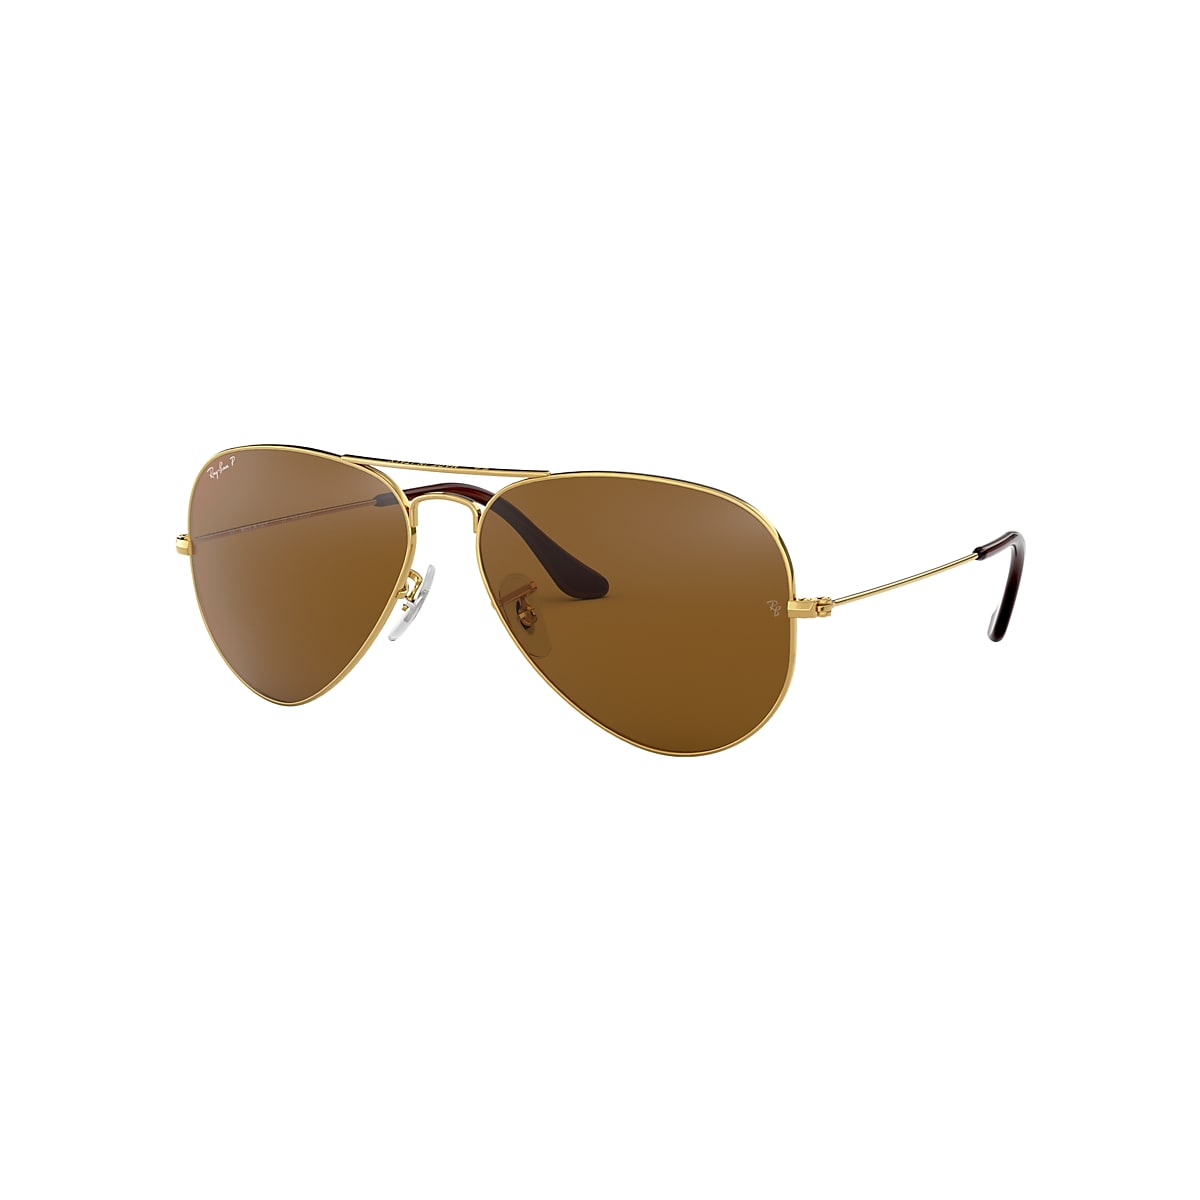 AVIATOR CLASSIC Sunglasses in Gold and Brown - RB3025 | Ray-Ban® US